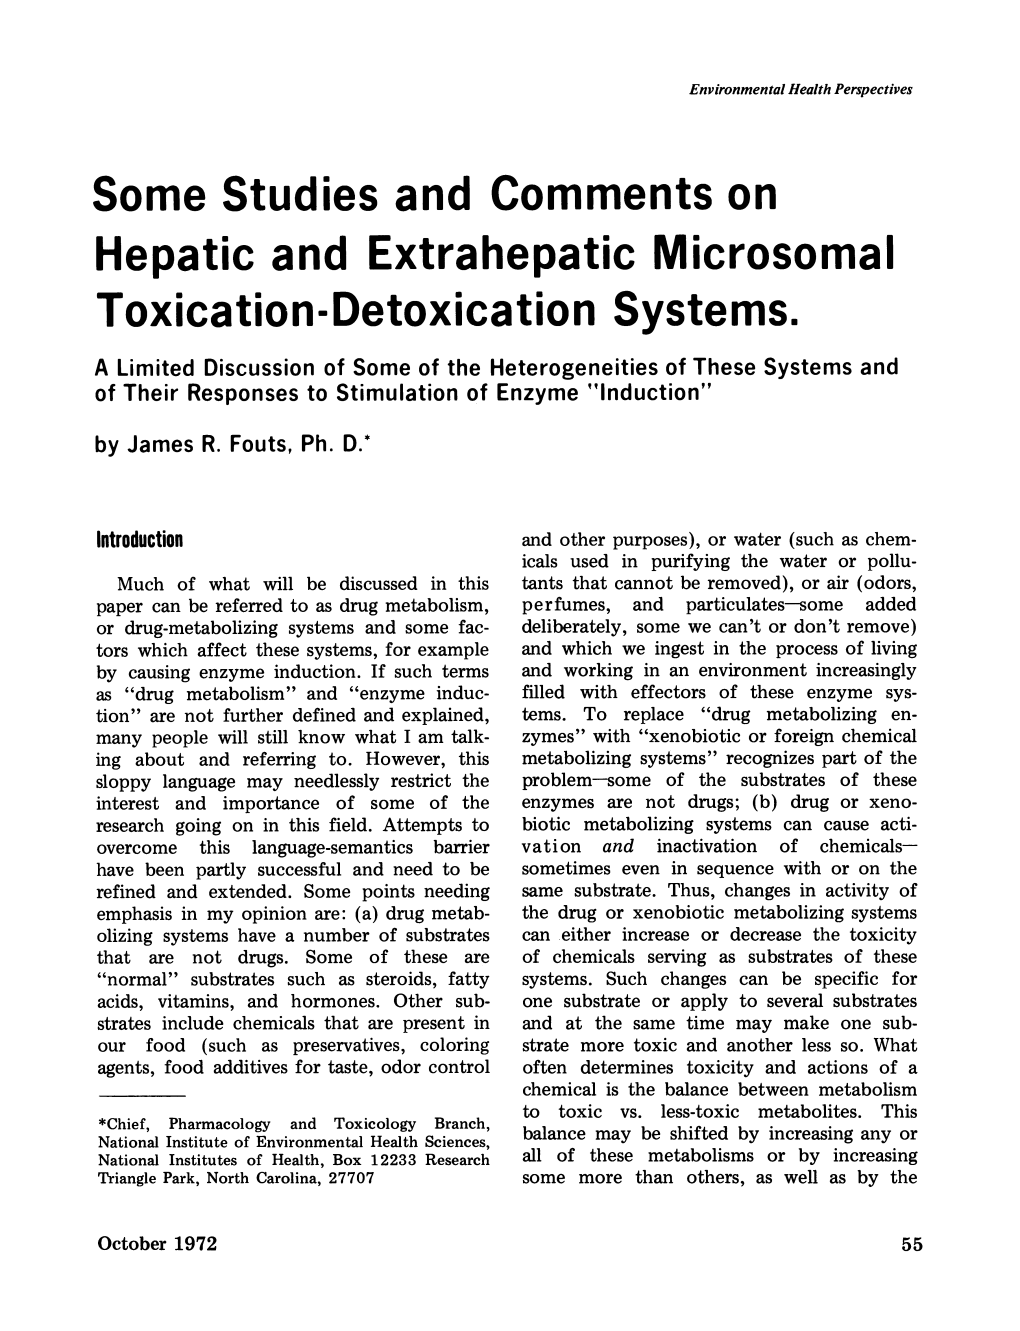 Some Studies and Comments on Toxication-Detoxication Systems